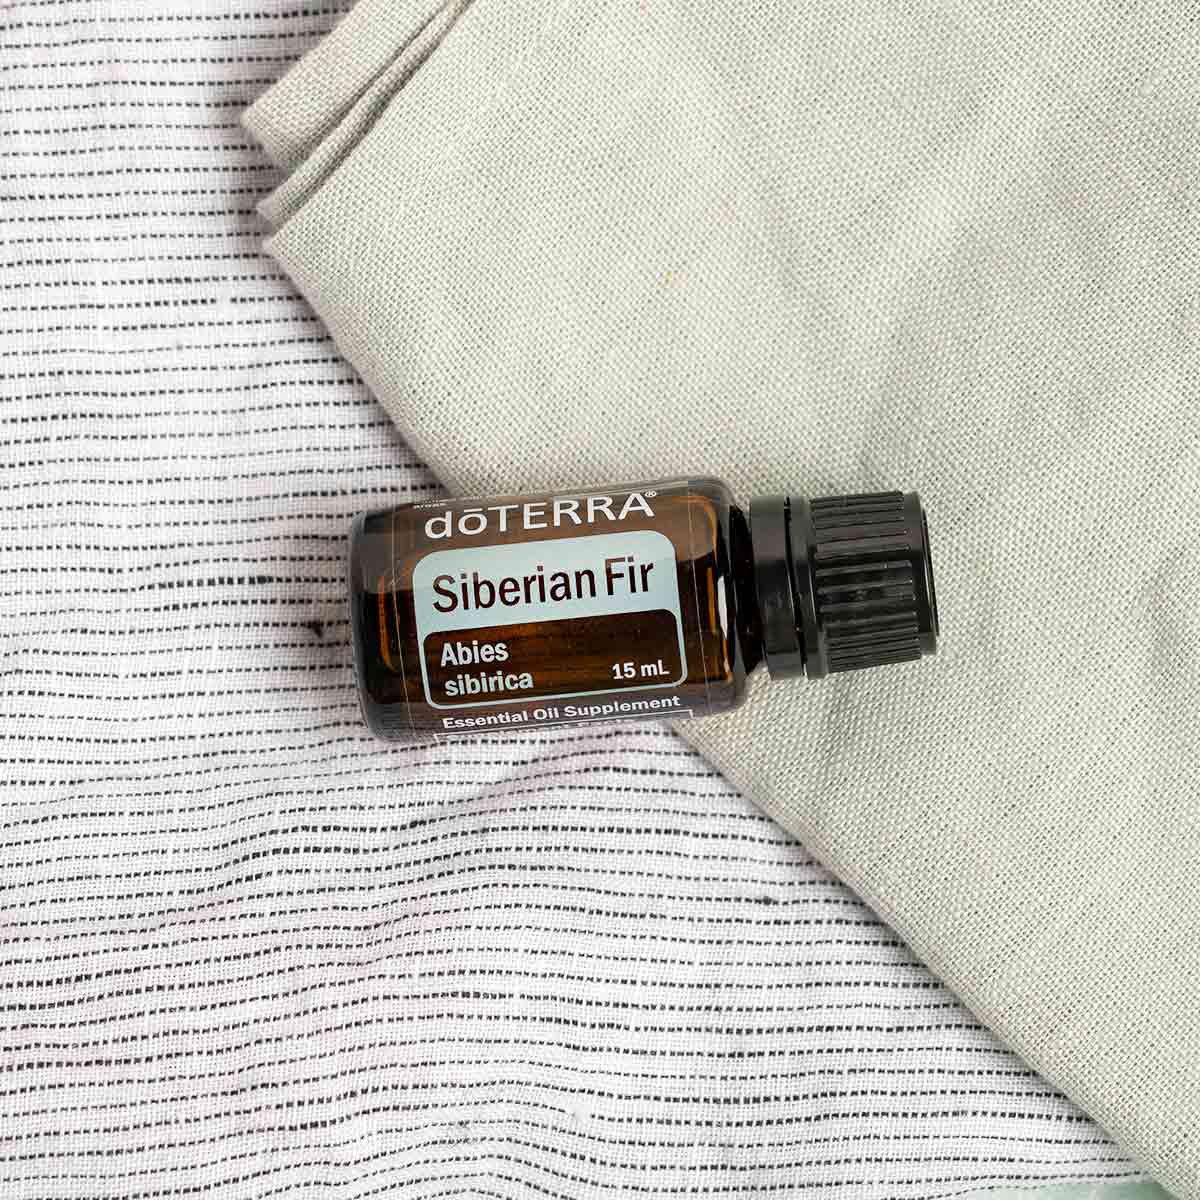 Bottle of Siberian Fir oil resting on a dish cloth. What are the benefits of Siberian Fir oil? Siberian Fir essential oil holds benefits for the ski